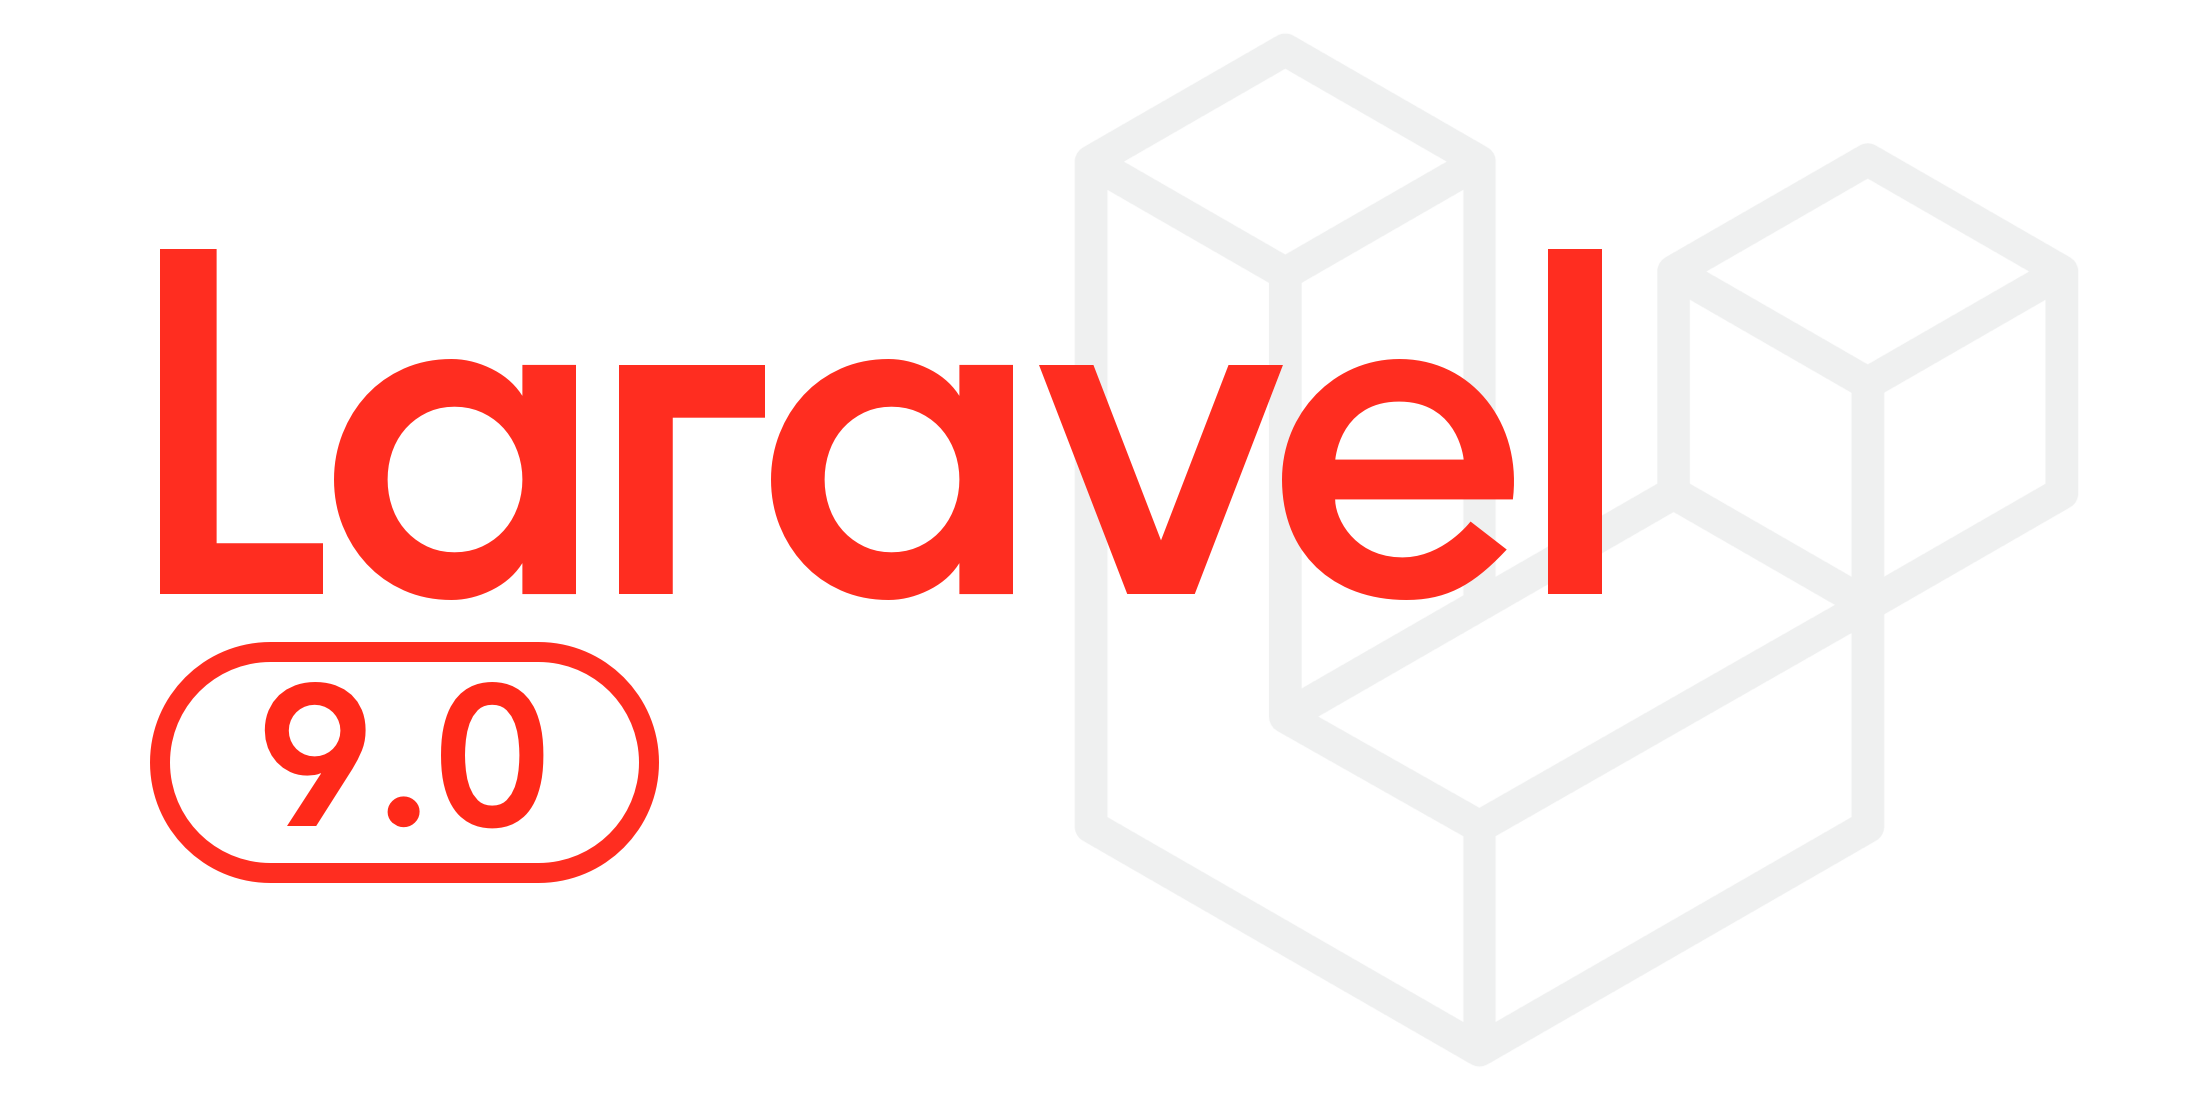 A look at what is coming to Laravel 9 image